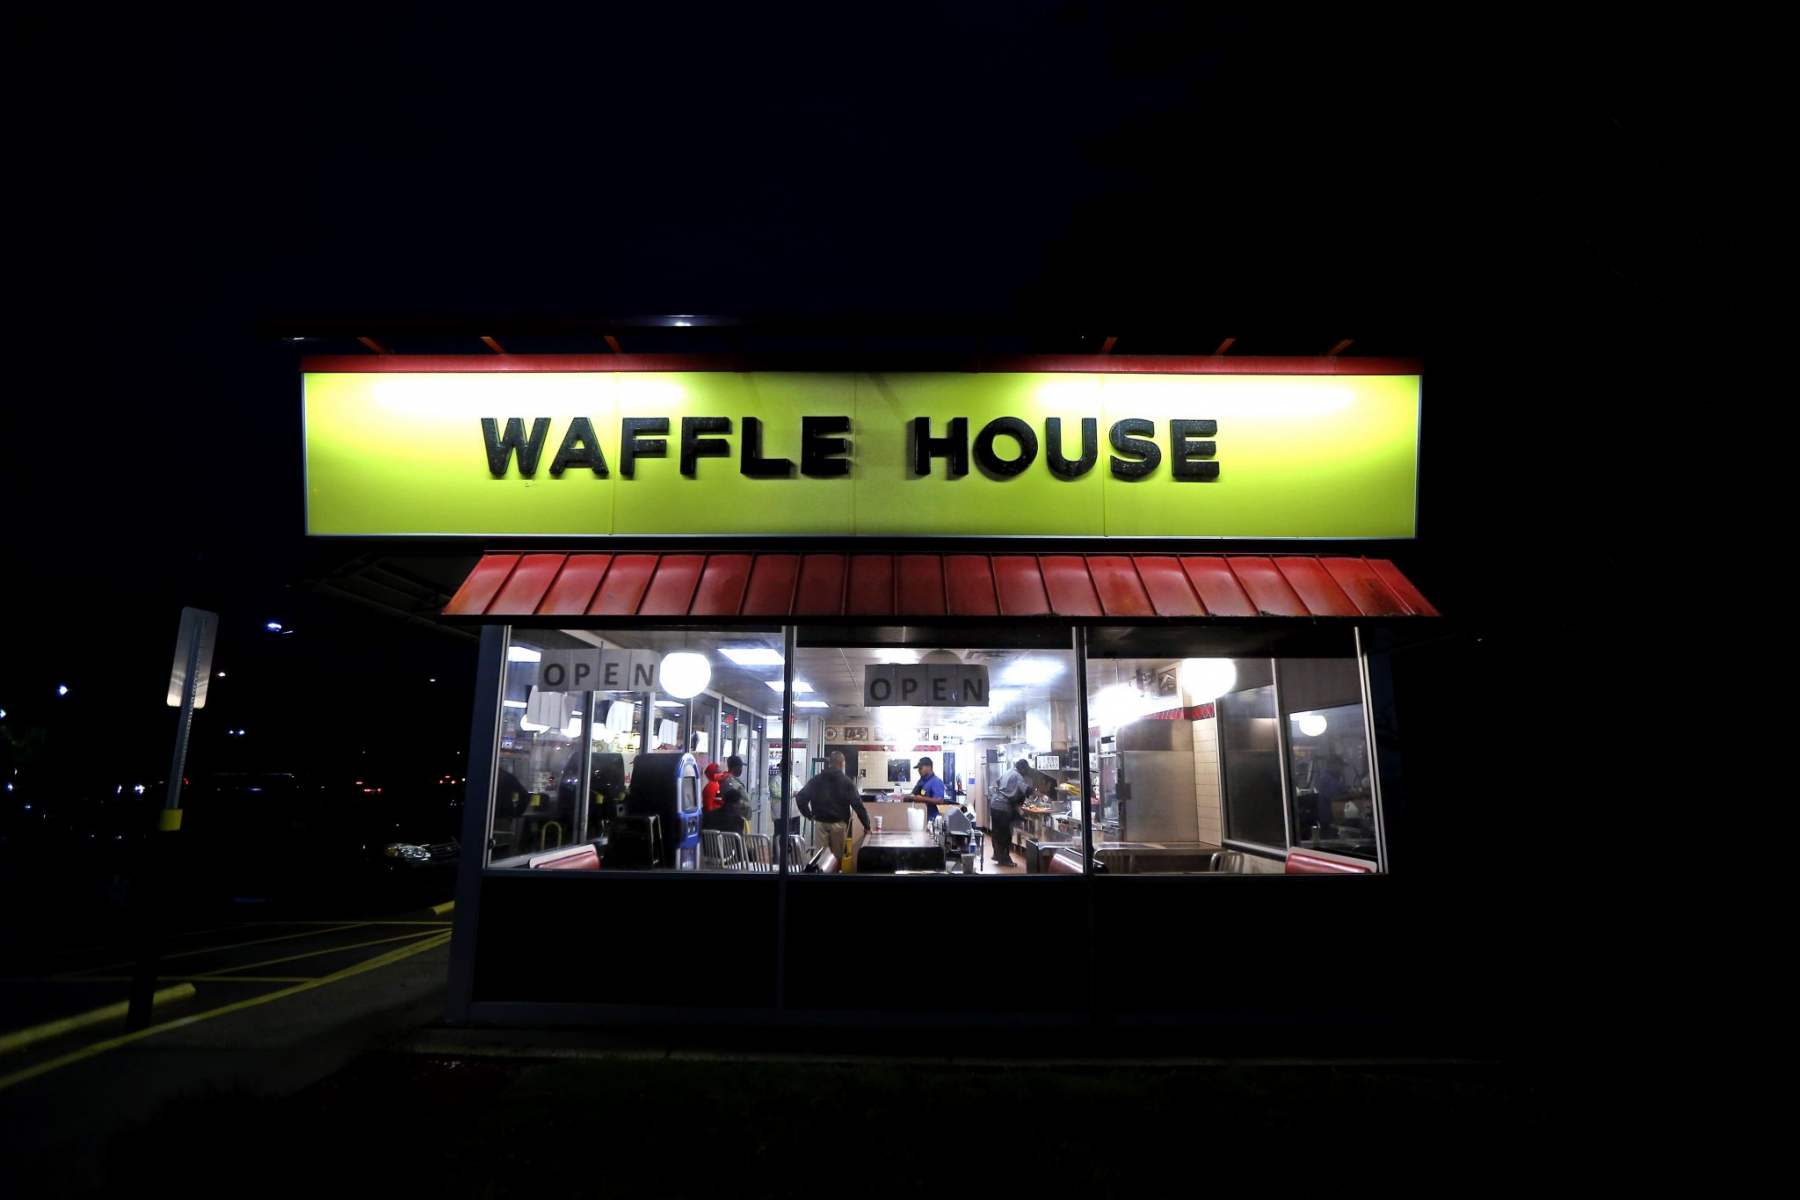 Over 400 Waffle House restaurants have been closed throughout the Southeast as officials work to reduce the spread of the deadly coronavirus. The Atlanta-based chain said that it has temporarily closed 418 restaurants throughout United States, 1,574 remain open. This Waffle House on Rt 55 in Durham was still open for business.March 25, 2020. Durham, NC